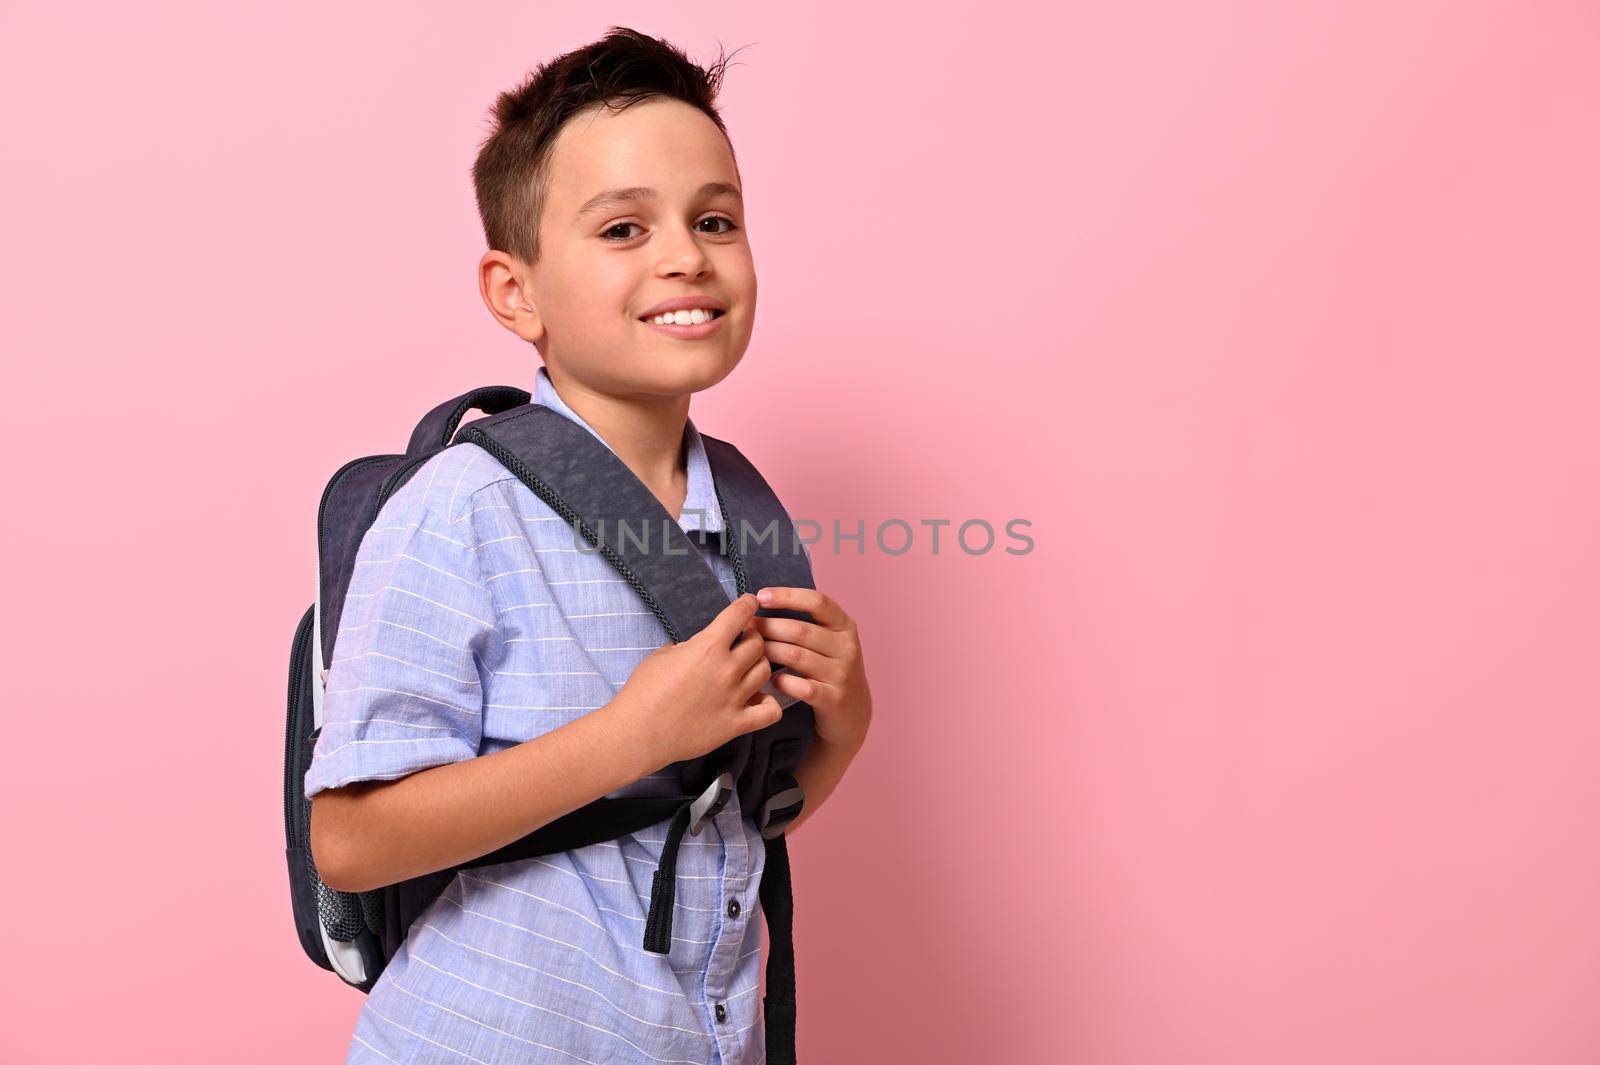 Side portrait of a smiling with toothy smile schoolboy with a backpack on his back on pink background with copy space. Back to school concepts